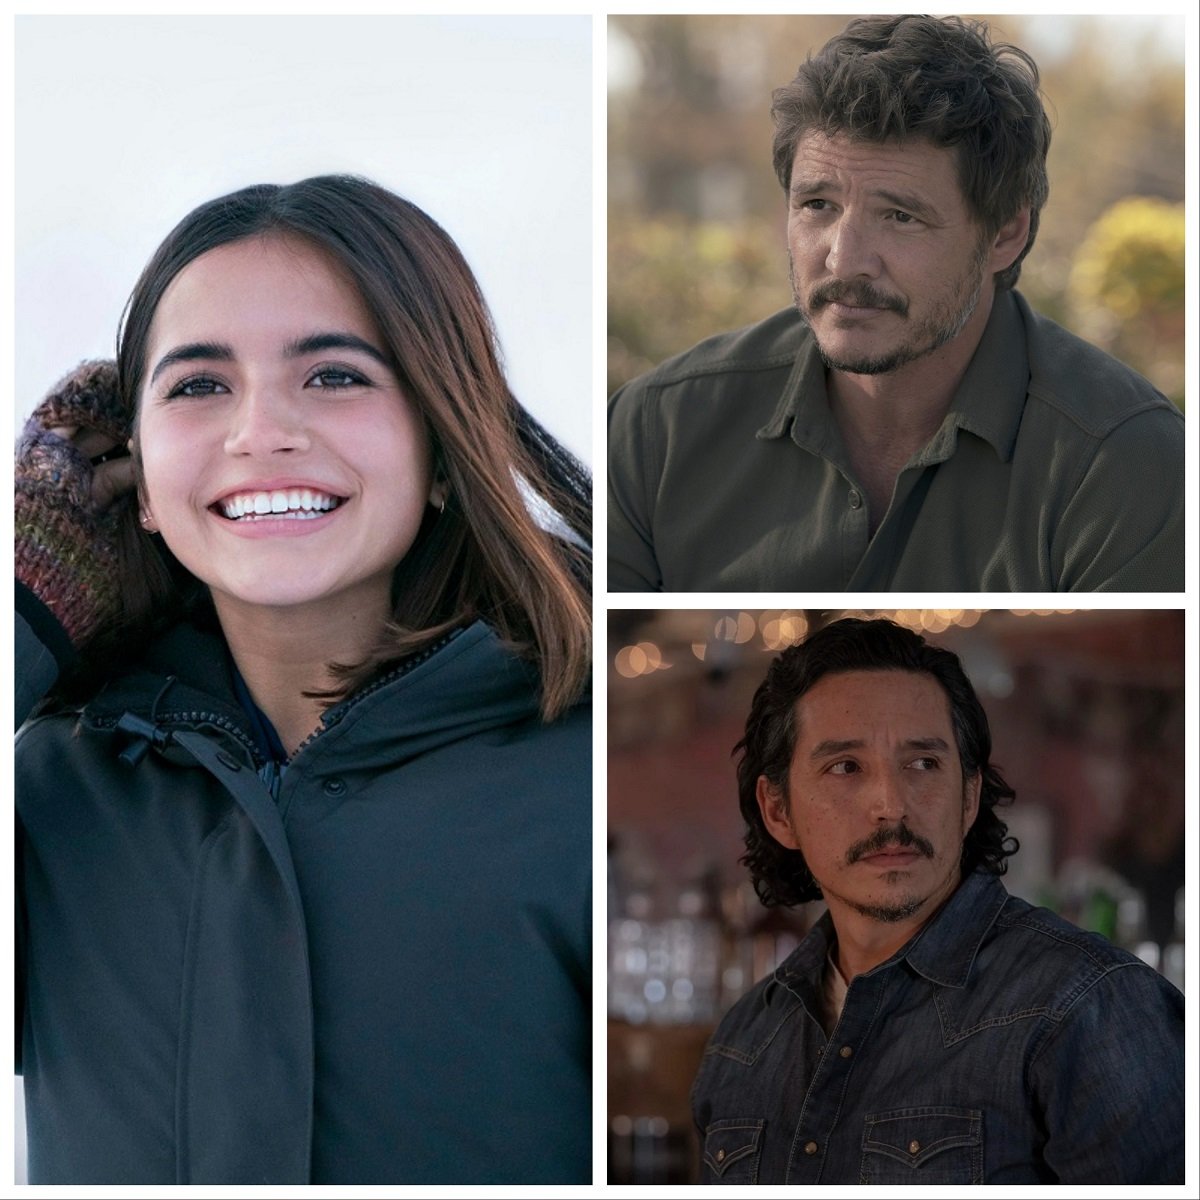 Composite image of Isabela Merced (left) as Julie in 'Let it Snow,' Pedro Pascal (upper right) as Joel in 'The Last of Us,' and Gabriel Luna (lower right) as Tommy in 'The Last of Us.'